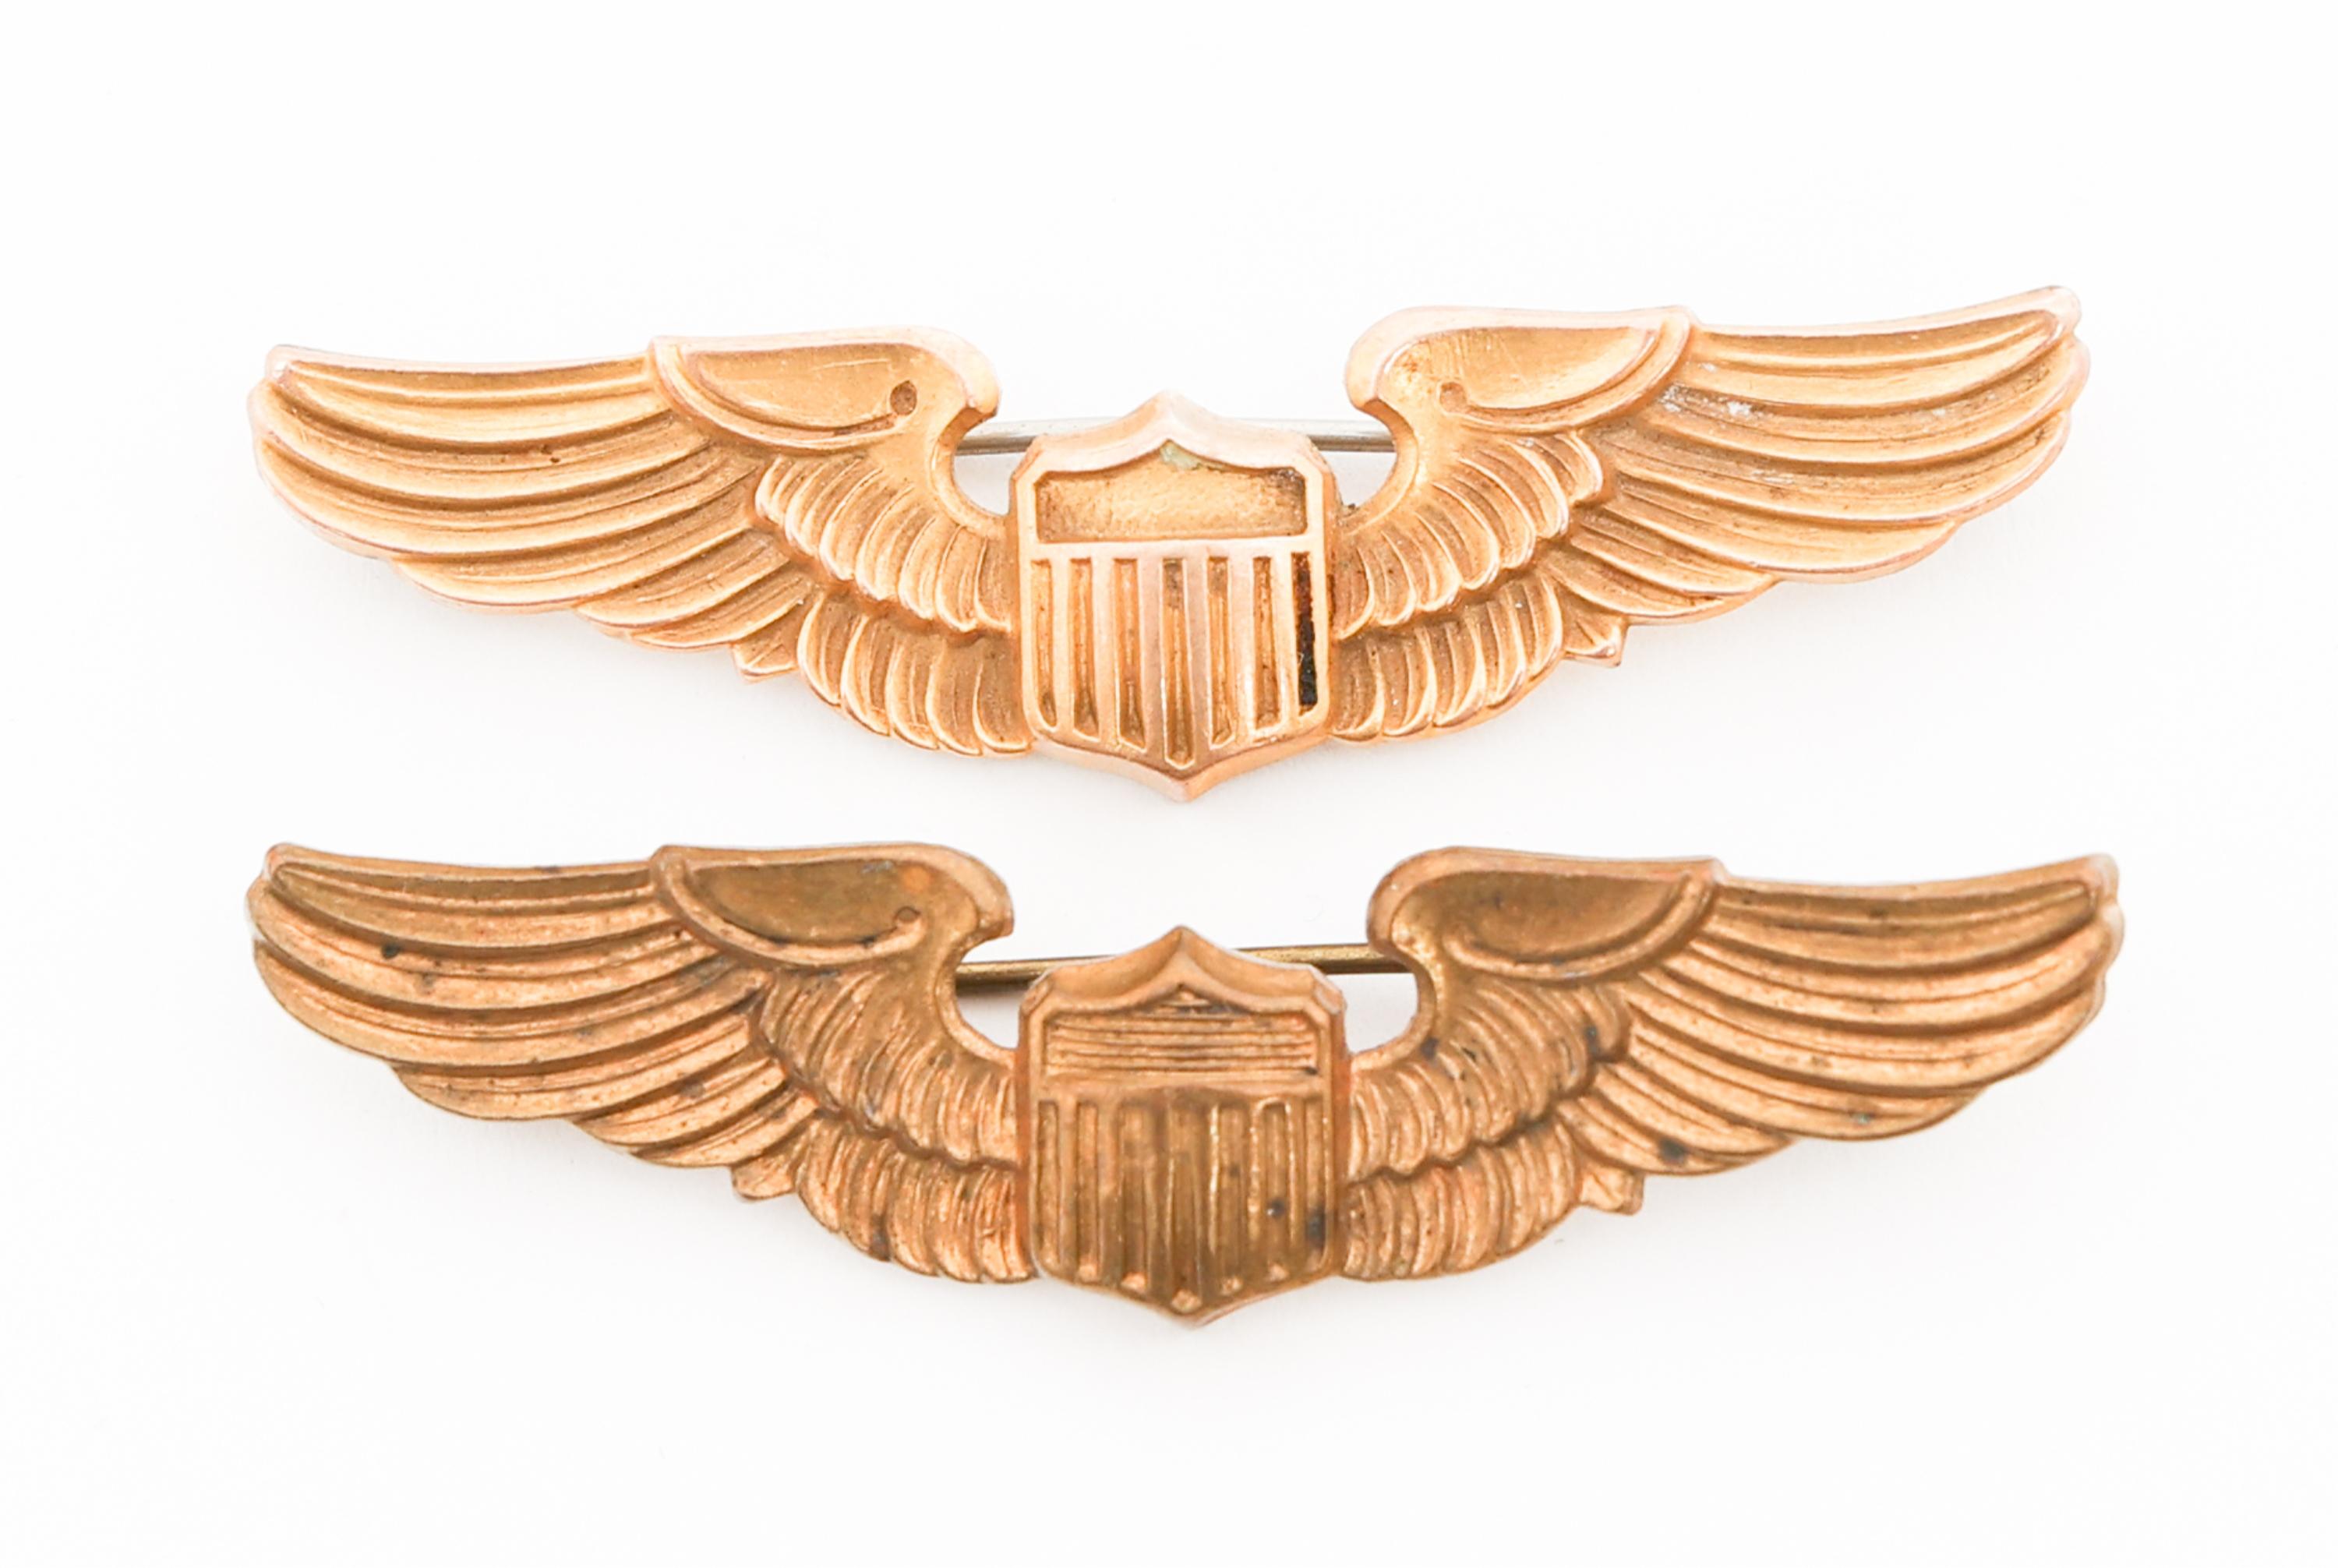 WWII US ARMY AIR FORCE FLIGHT INSTRUCTOR WINGS